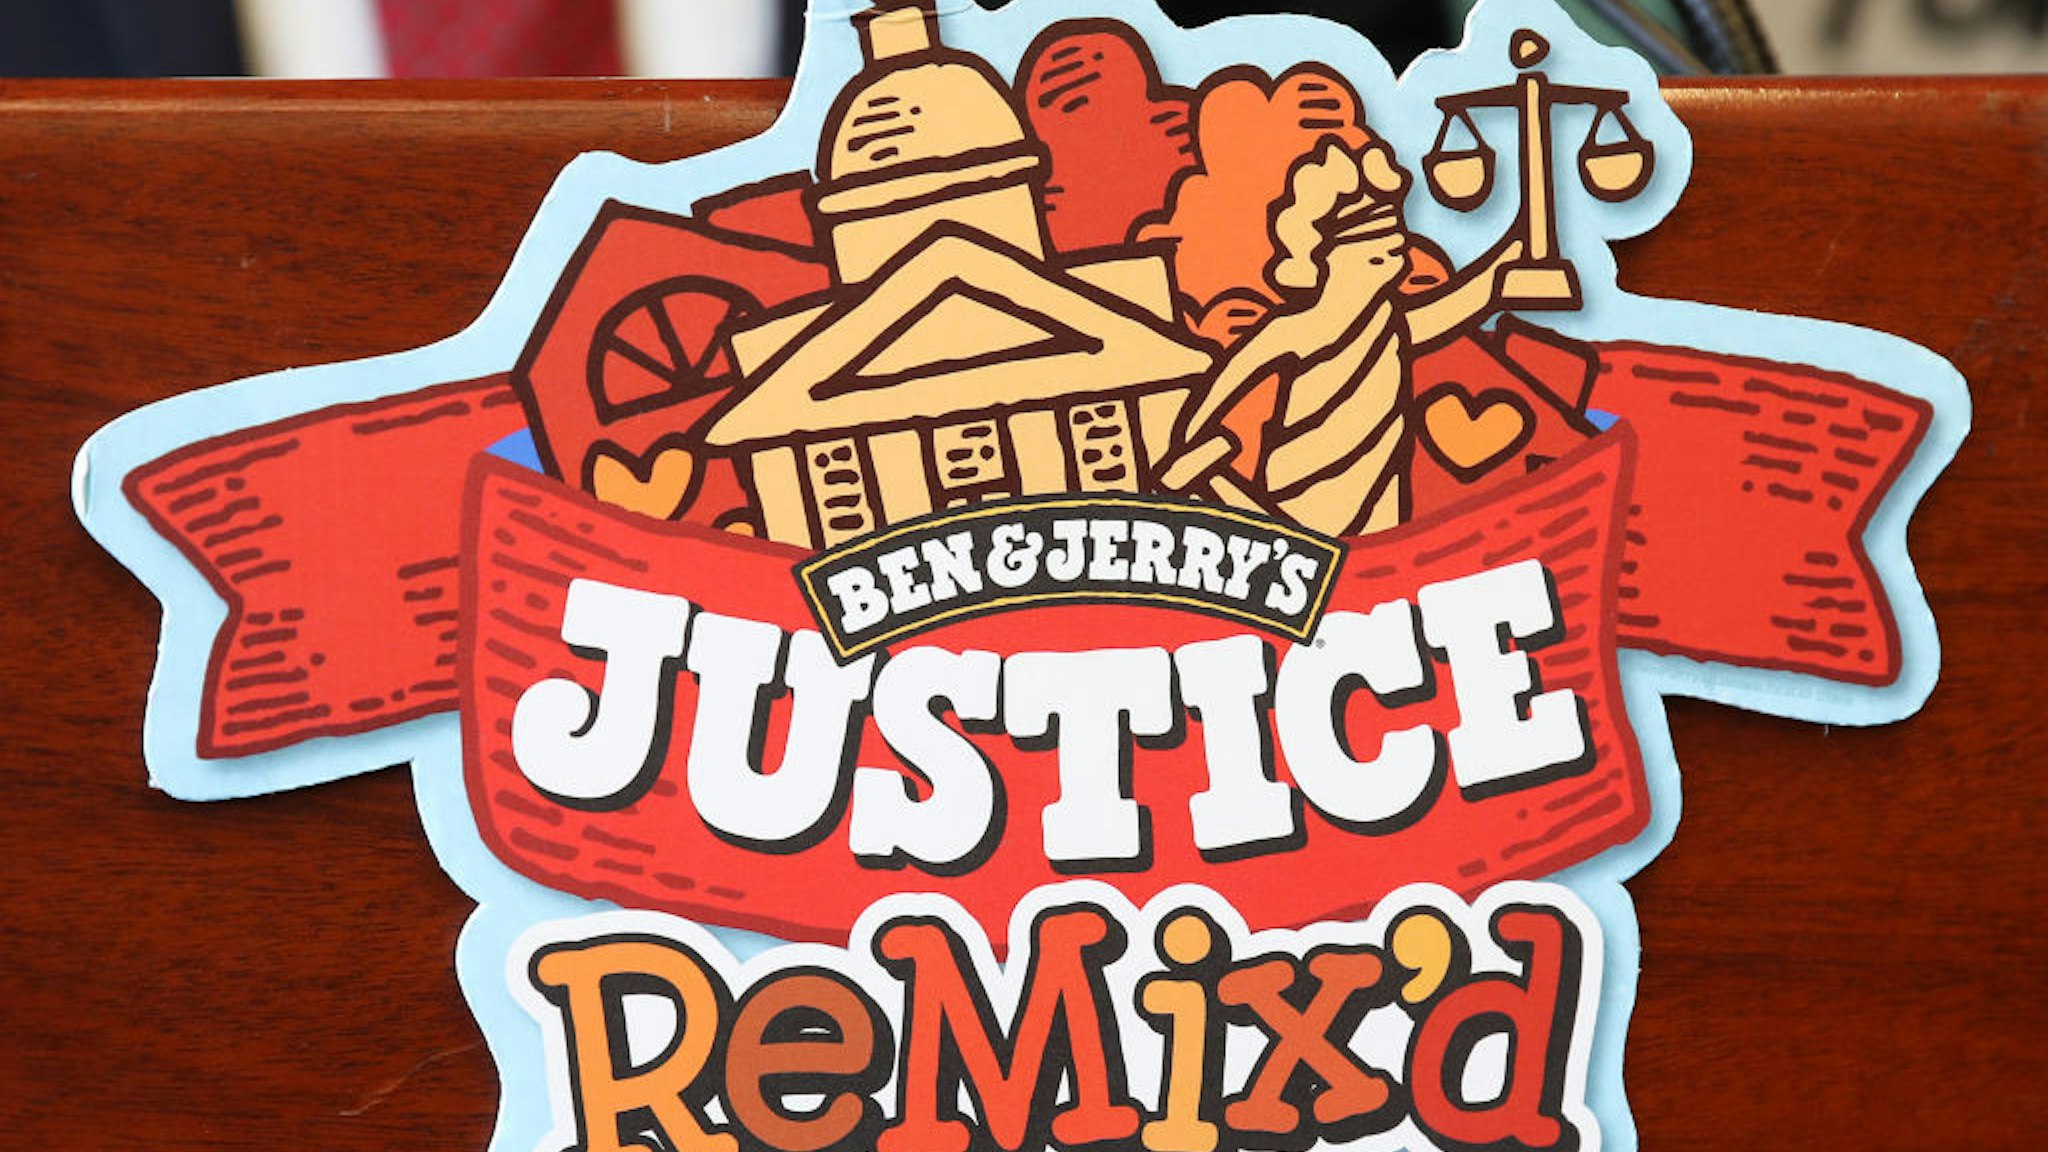 WASHINGTON, DC - SEPTEMBER 03: Ben &amp; Jerry's announced a new flavor, Justice Remix'd, at a press conference September 03, 2019 in Washington, DC. Ben &amp; Jerry's launched the new flavor in conjunction with the civil rights organization, Advancement Project, to "spotlight structural racism in a broken criminal legal system". (Photo by Win McNamee/Getty Images)